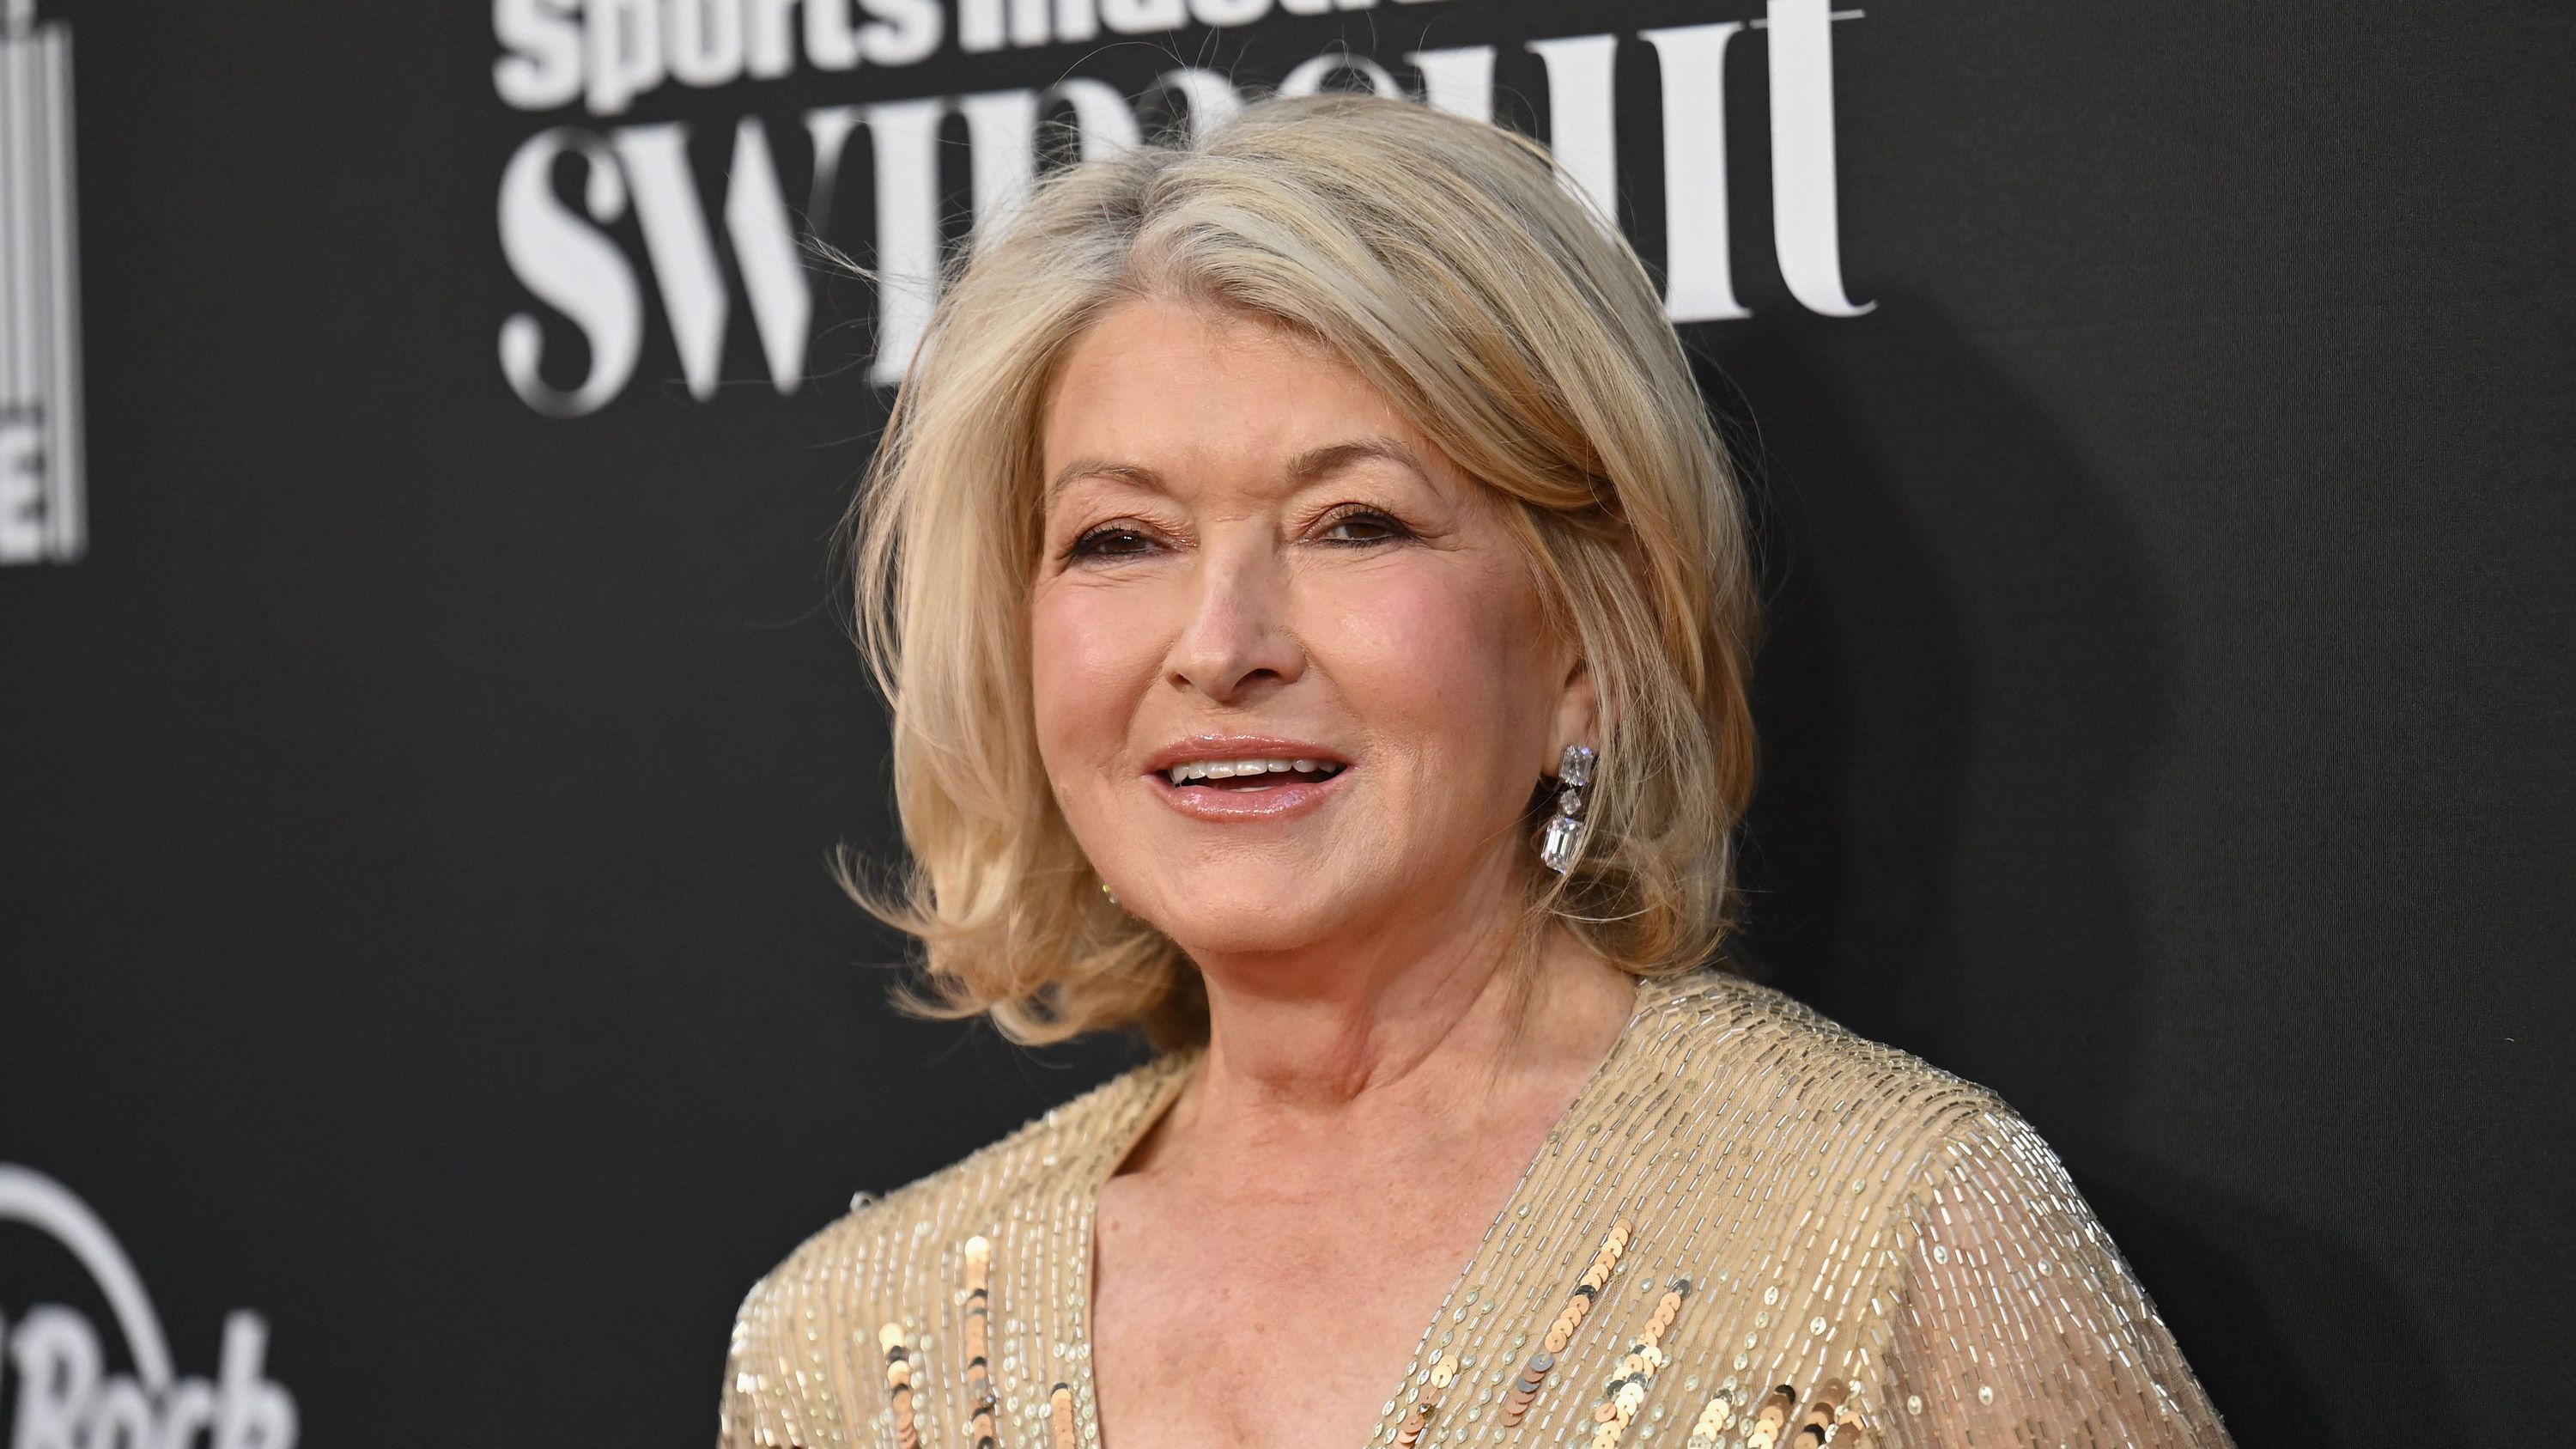 Martha Stewart does dress her age, thank you very much